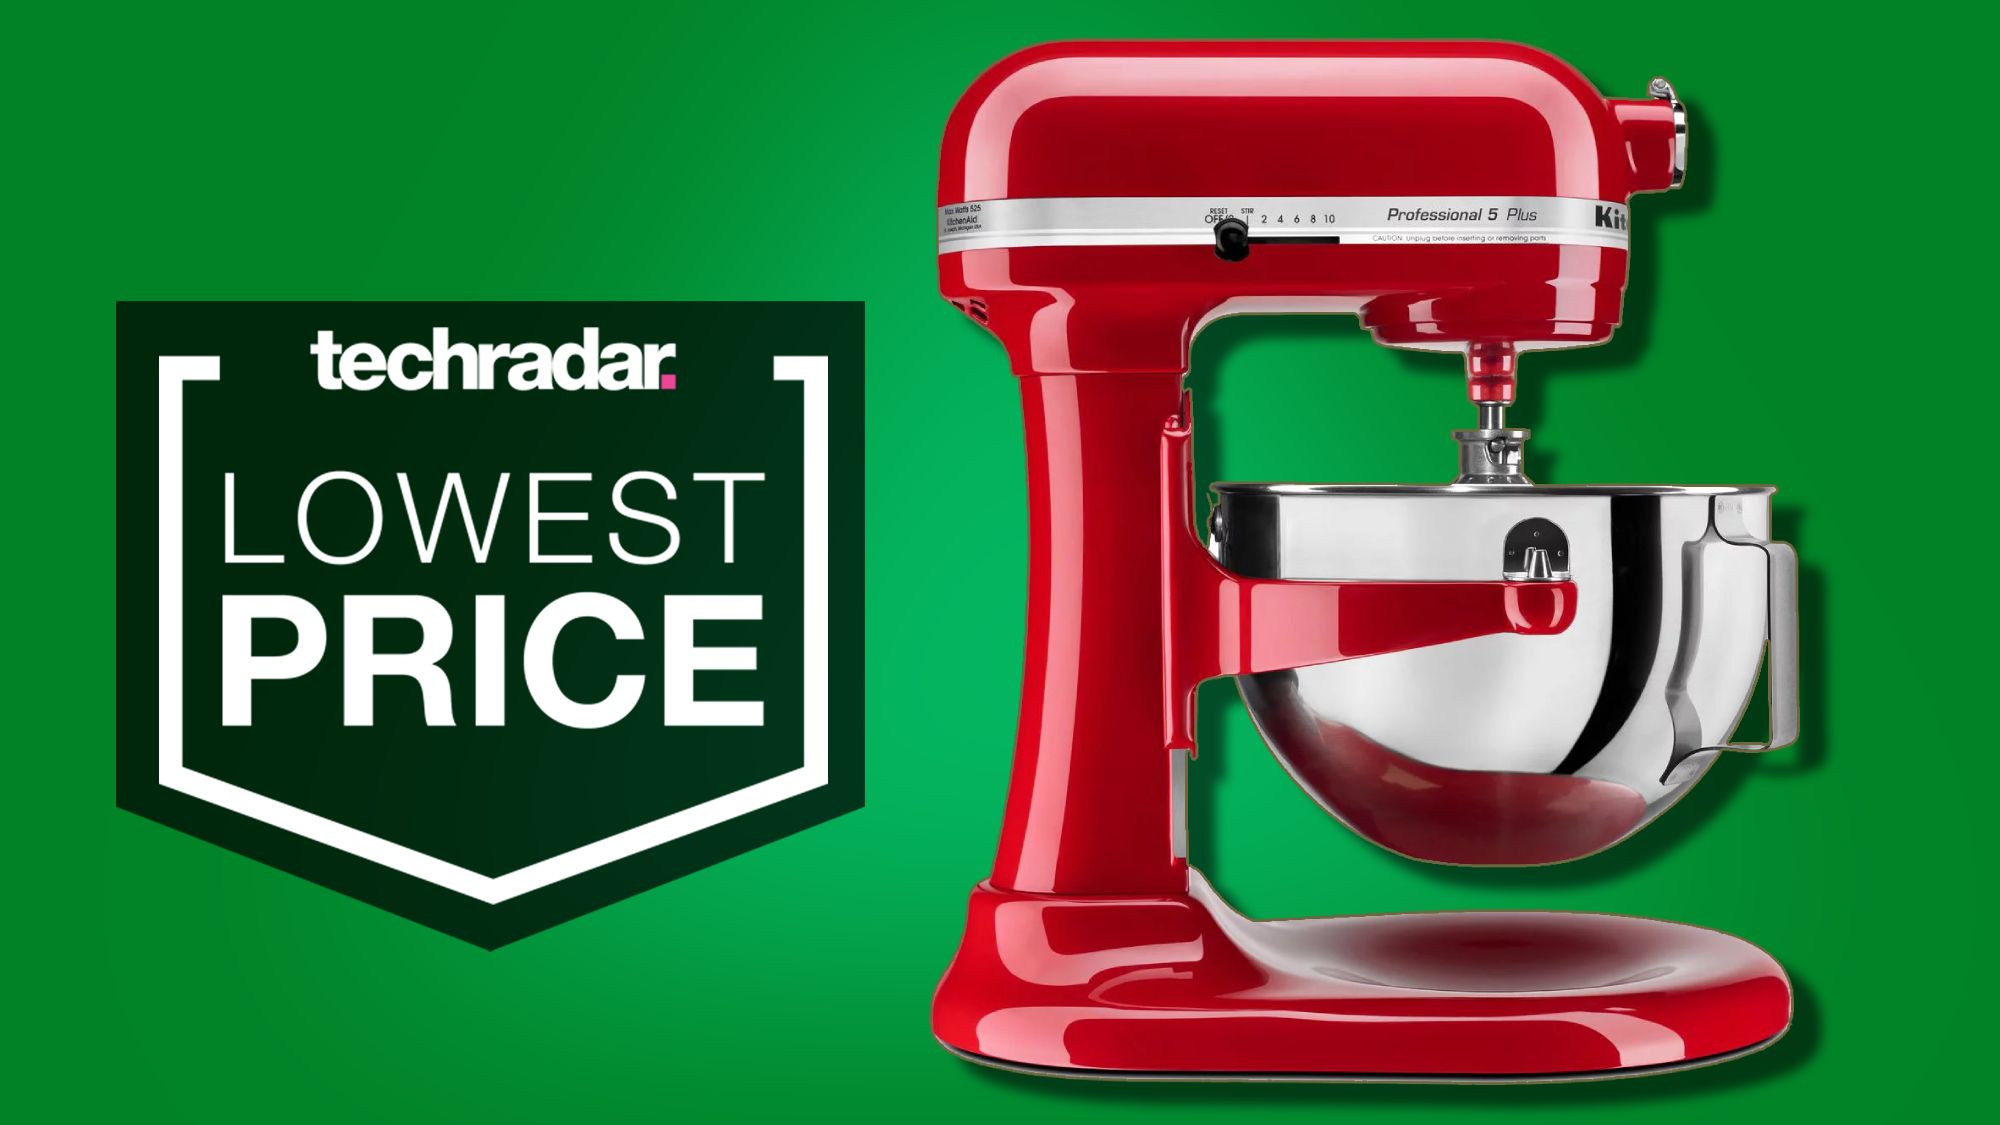 KitchenAid stand mixer: Get the KitchenAid Pro 5 Plus for more than $200 off